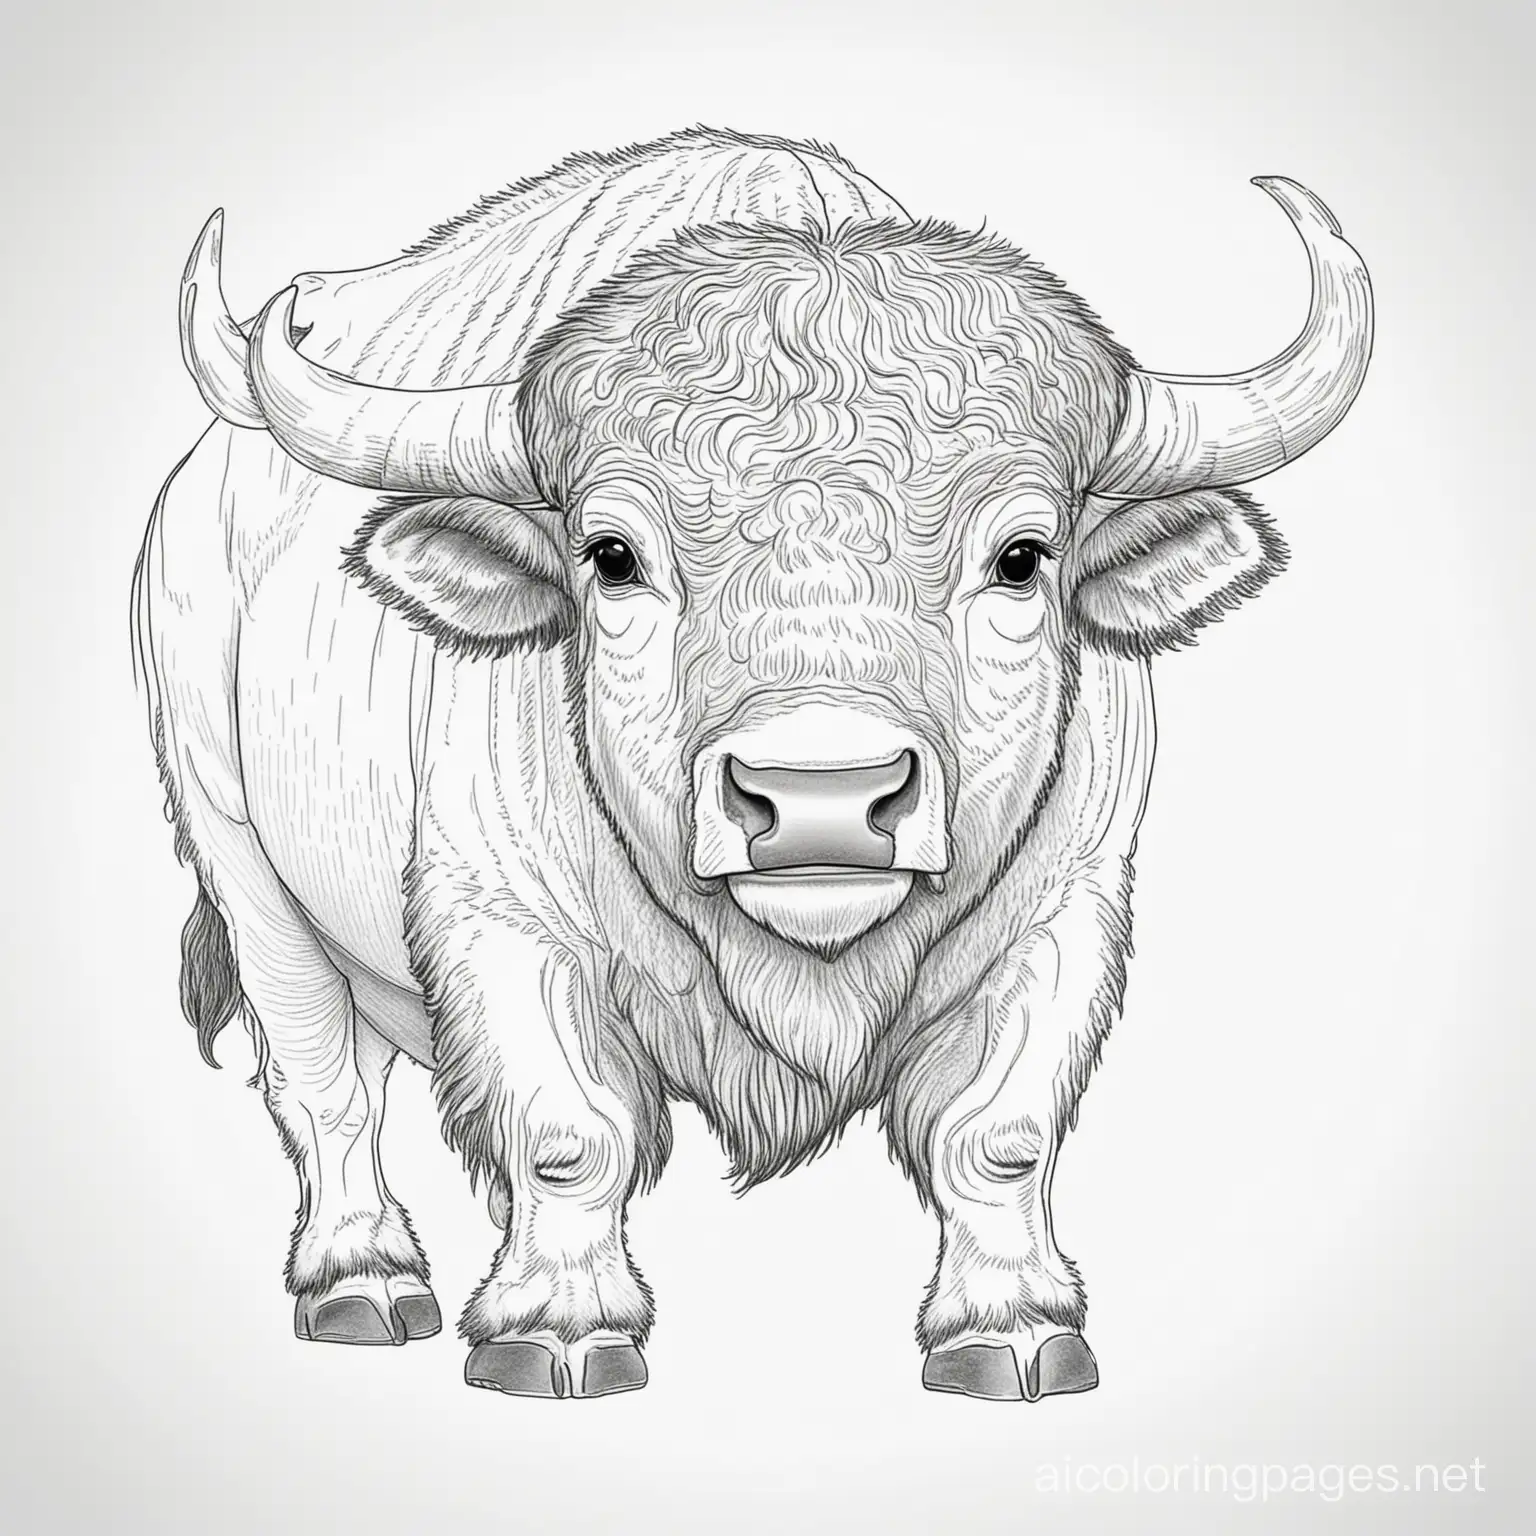 Buffalo-Coloring-Page-for-Kids-Simple-Line-Art-on-White-Background